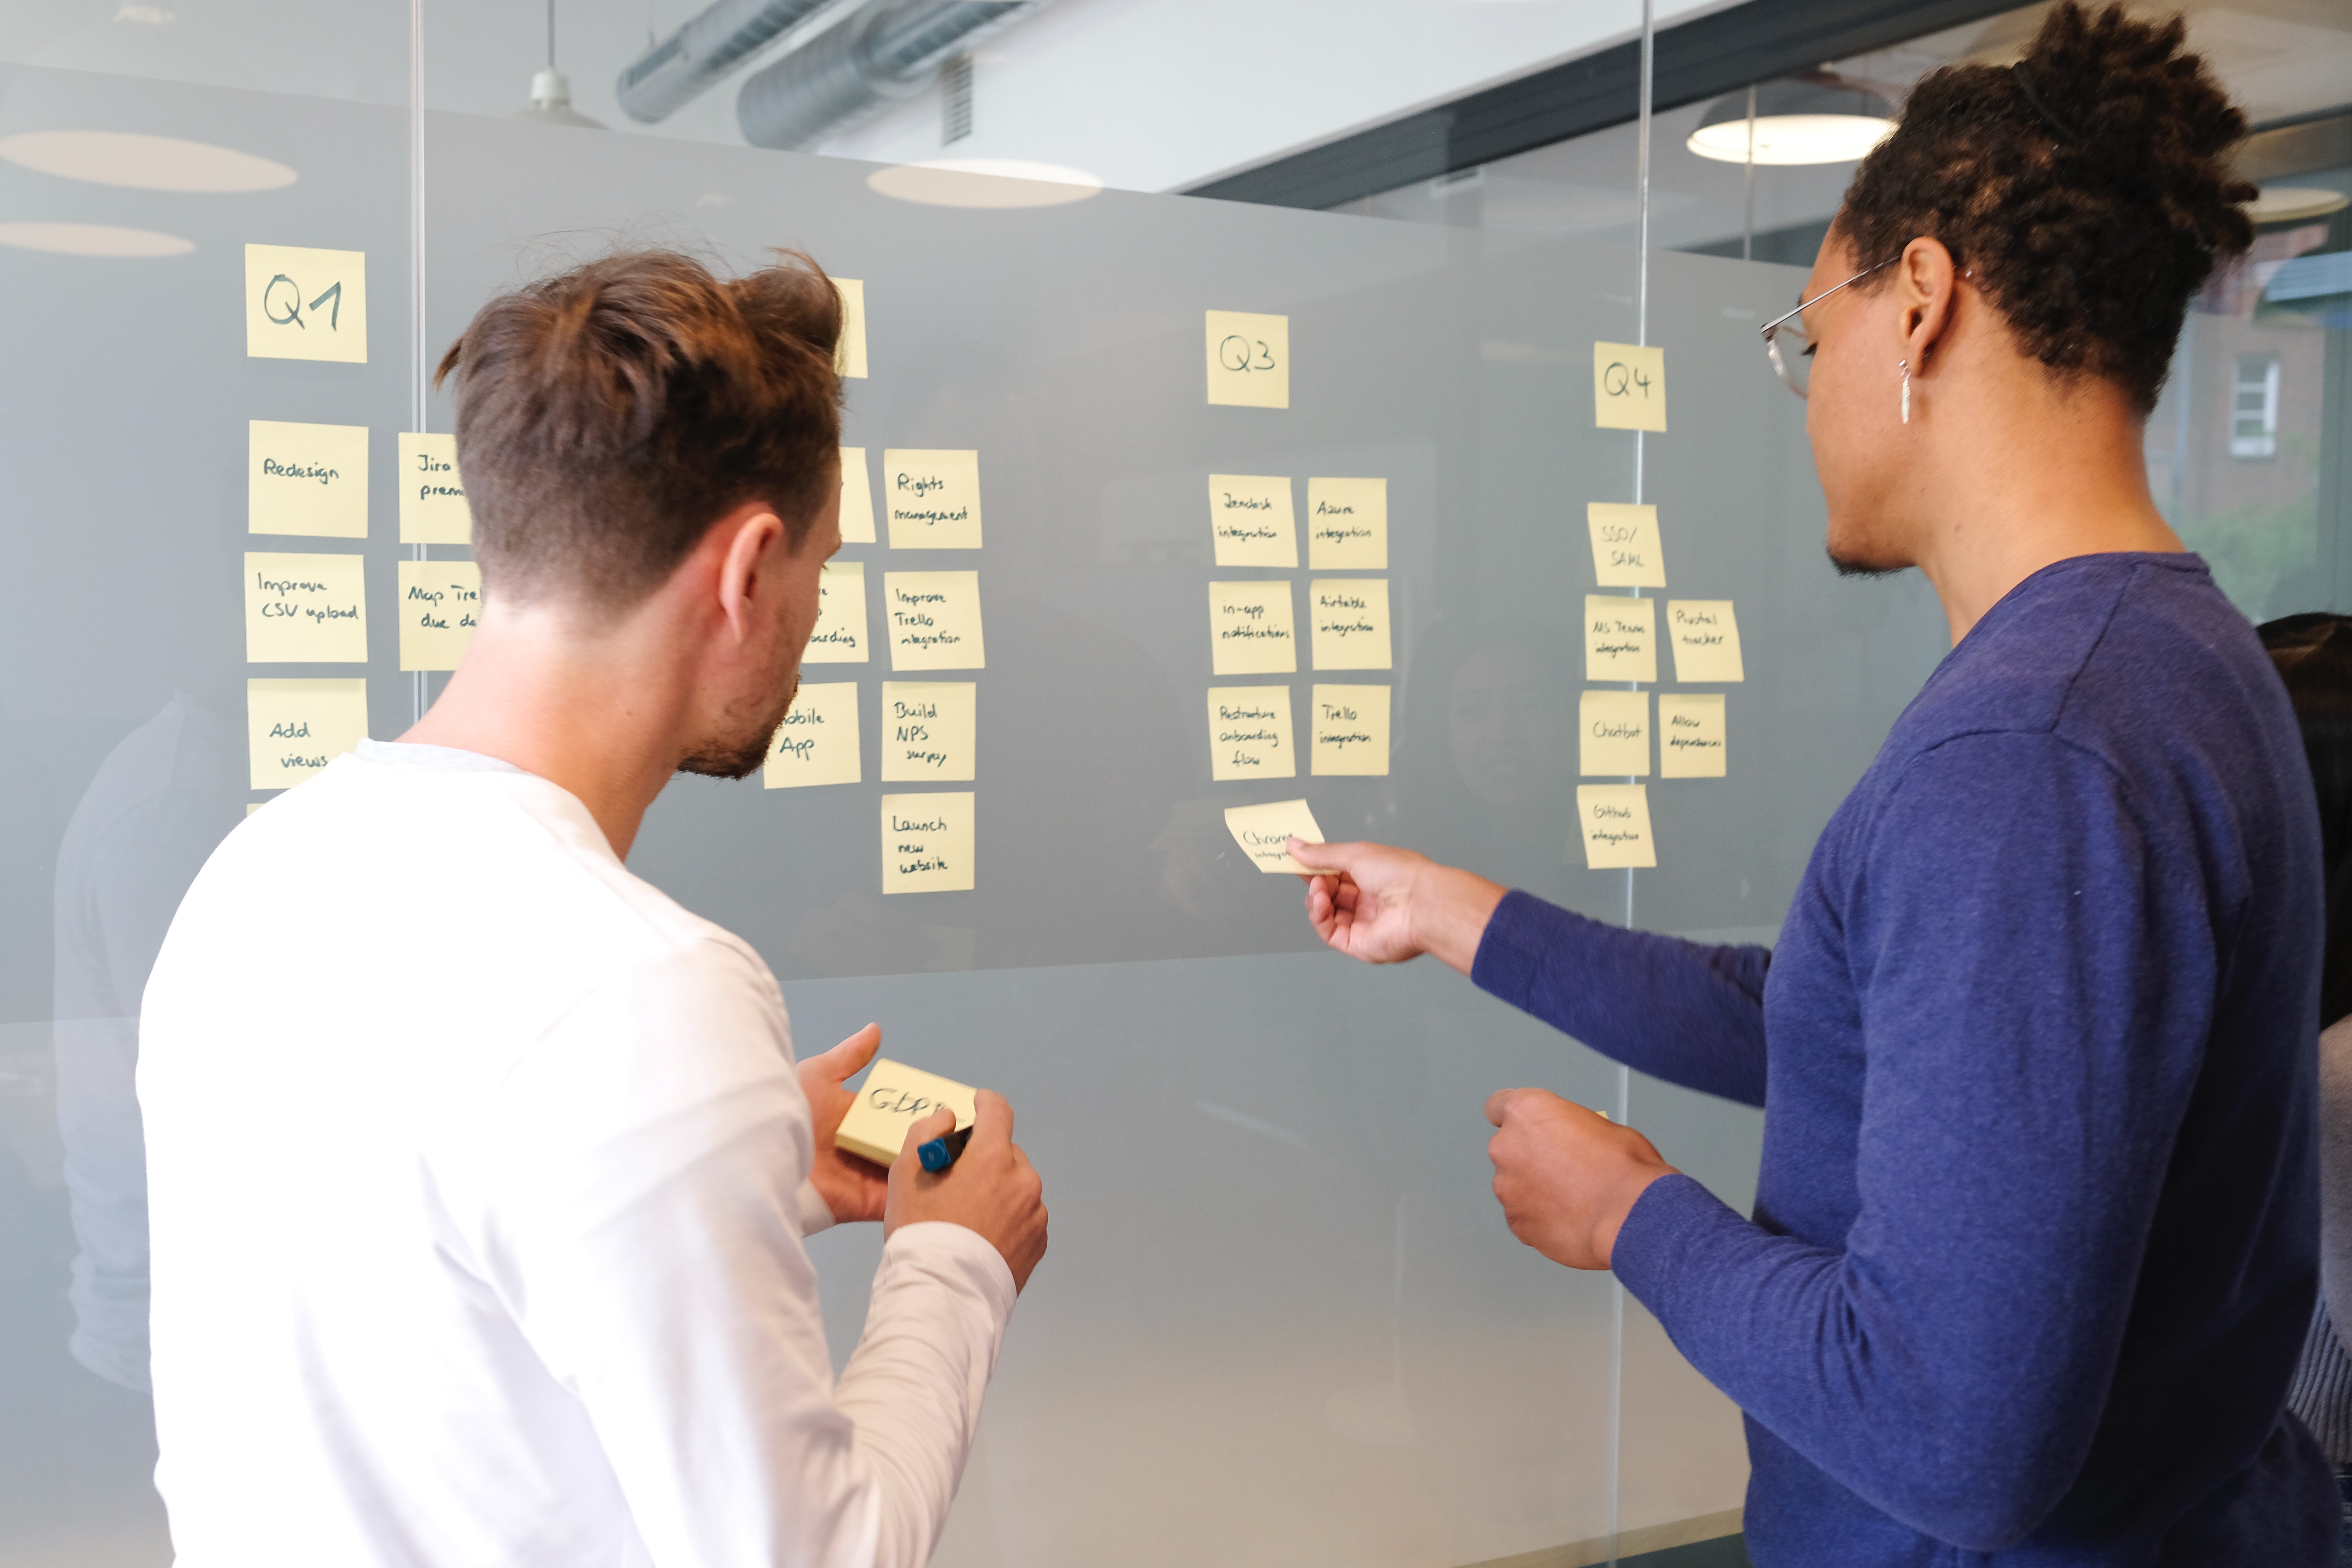 Two individuals in a collaborative planning session using sticky notes on a glass wall to organize tasks by quarters, with one person placing a note.